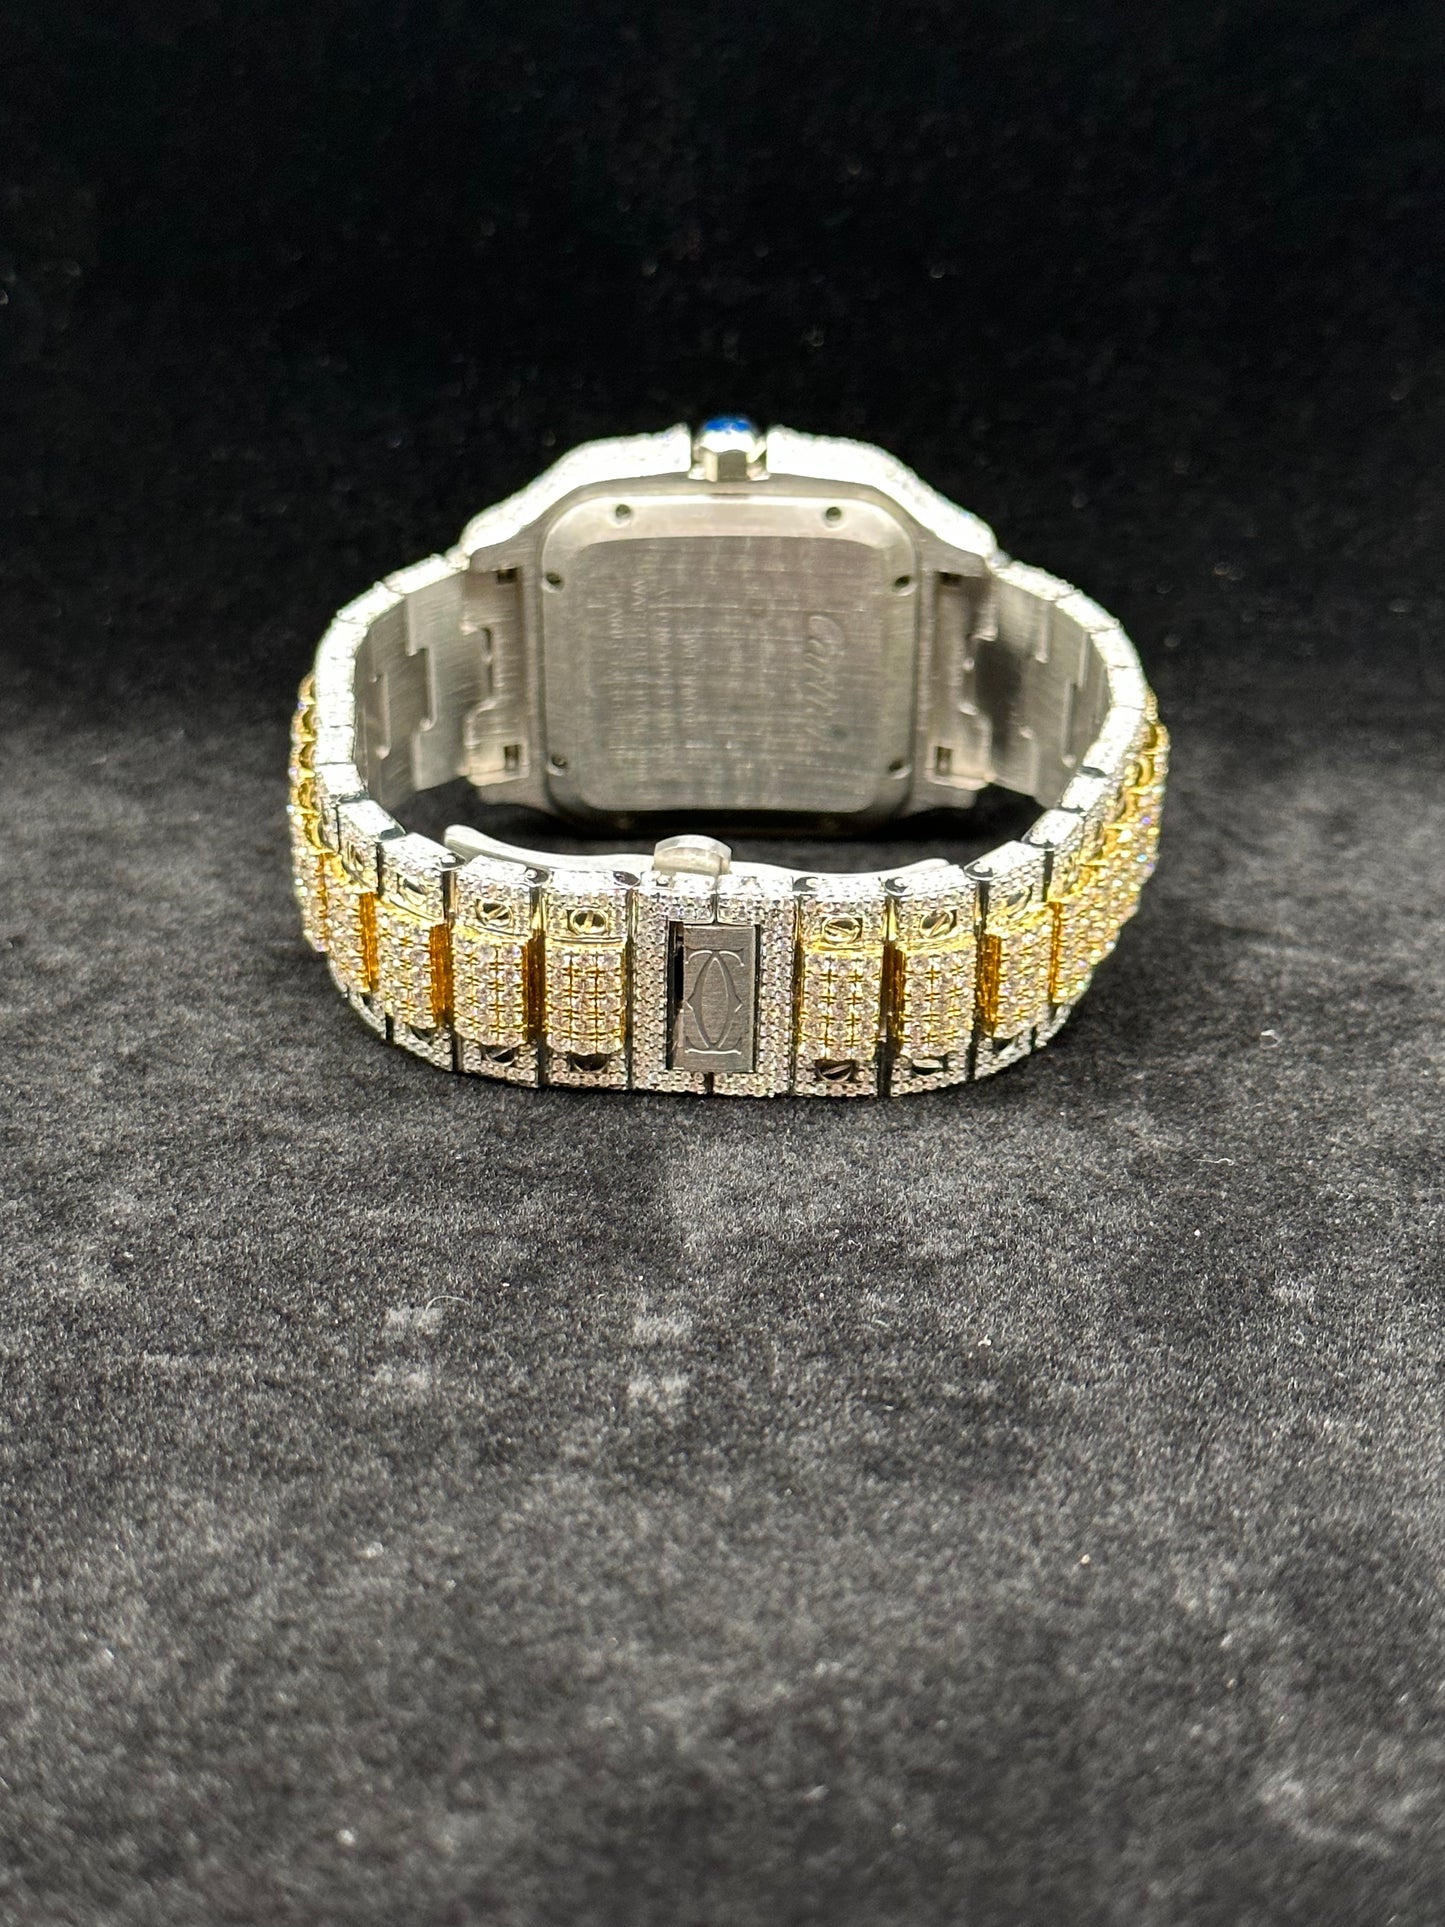 Two-Tone Yellow & White with Red Numbers Diamond Moissanite Automatic Watch